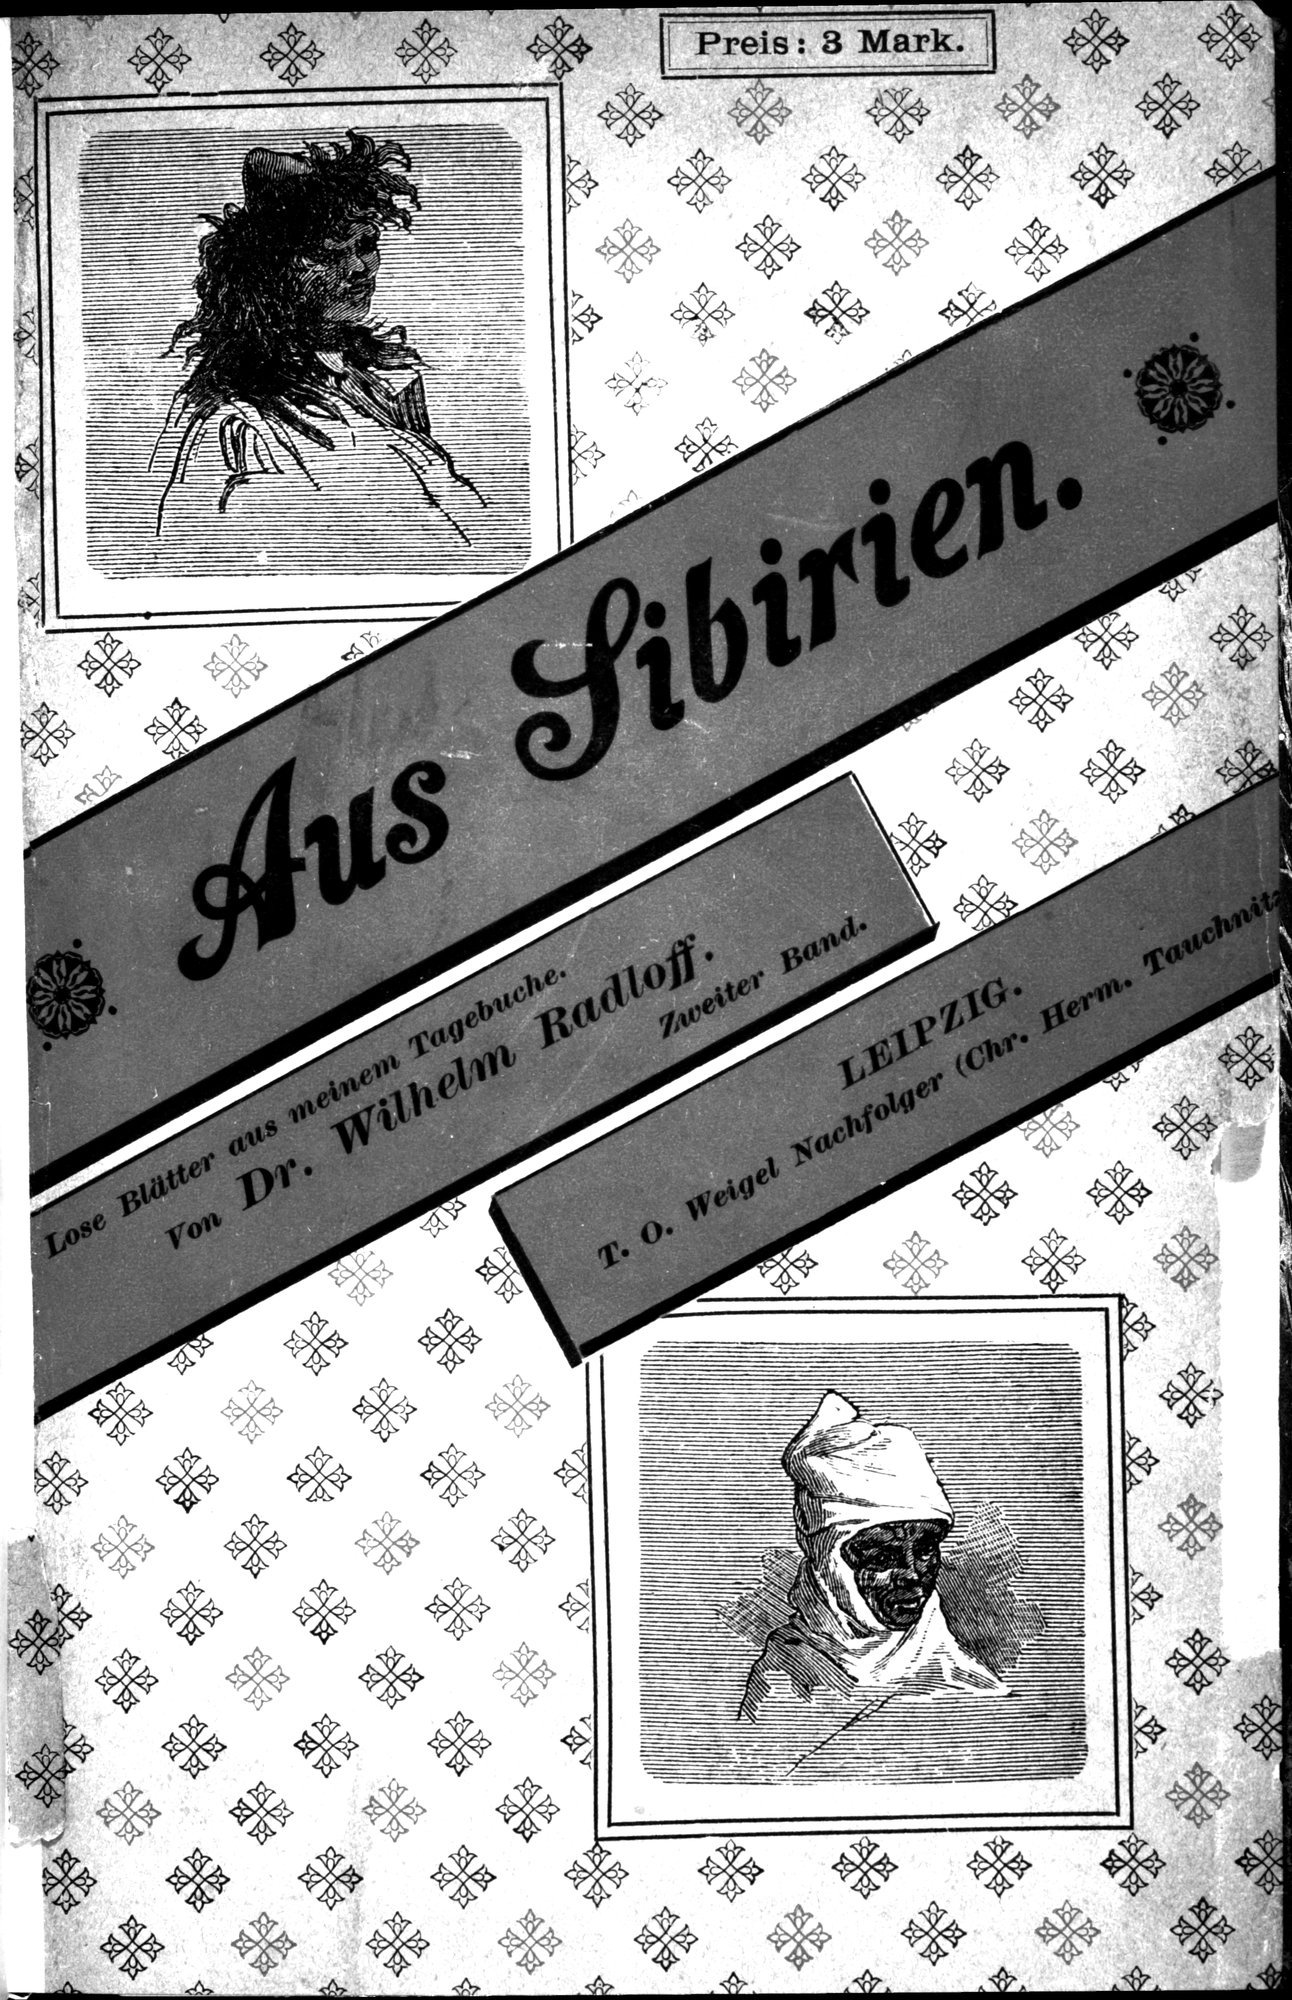 Aus Siberien : vol.2 / Page 5 (Grayscale High Resolution Image)